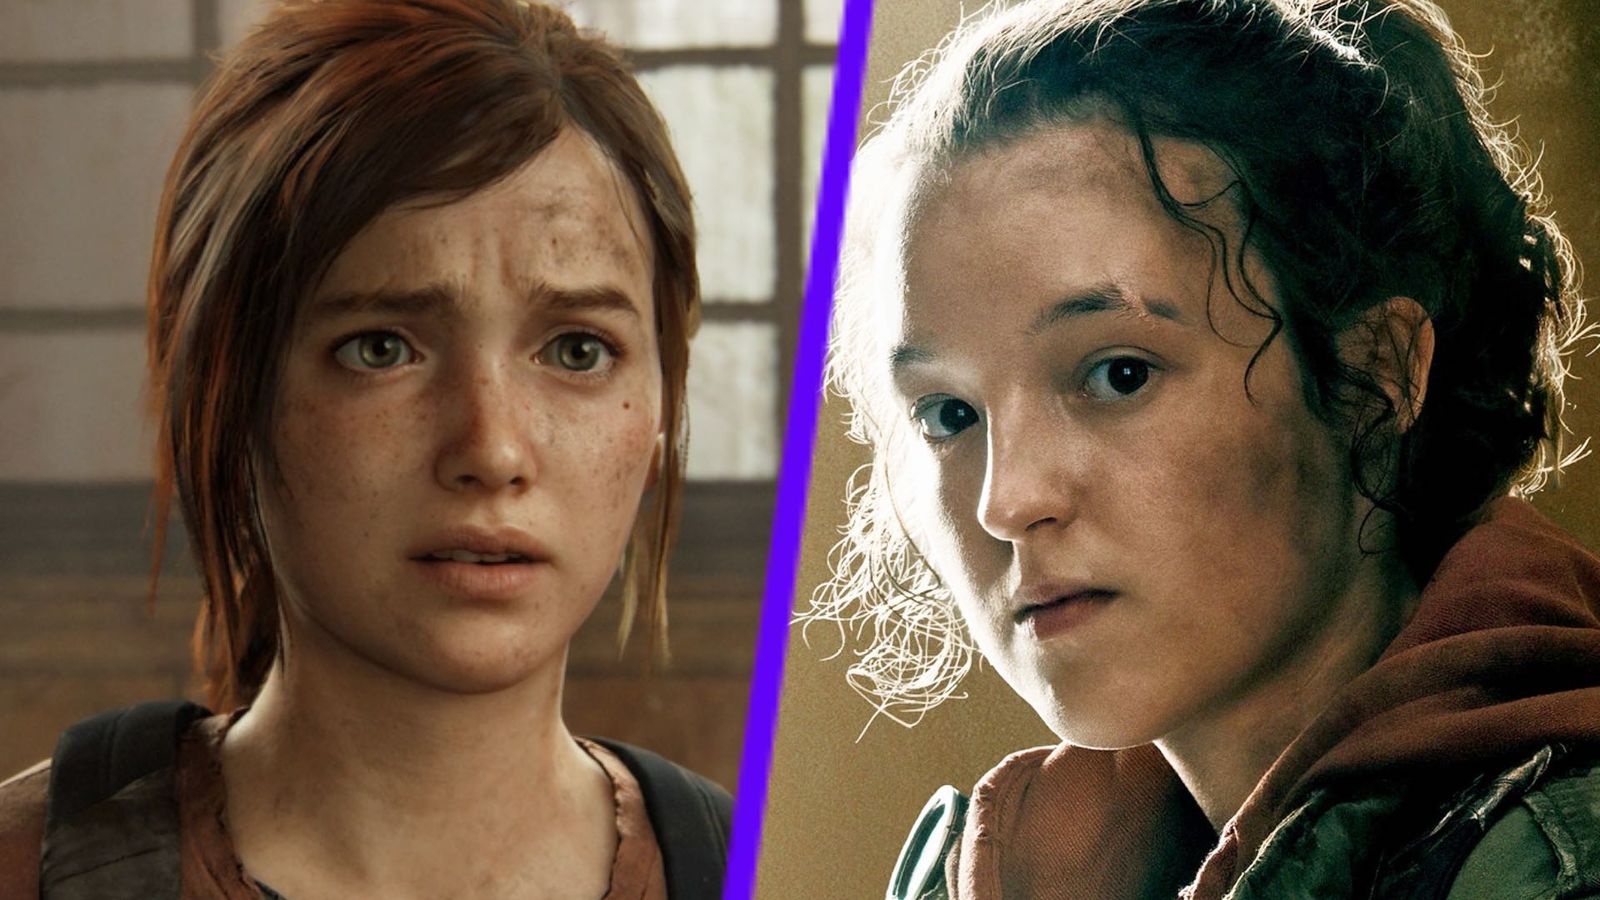 the last of us part 1 sales skyrocket after shows launch